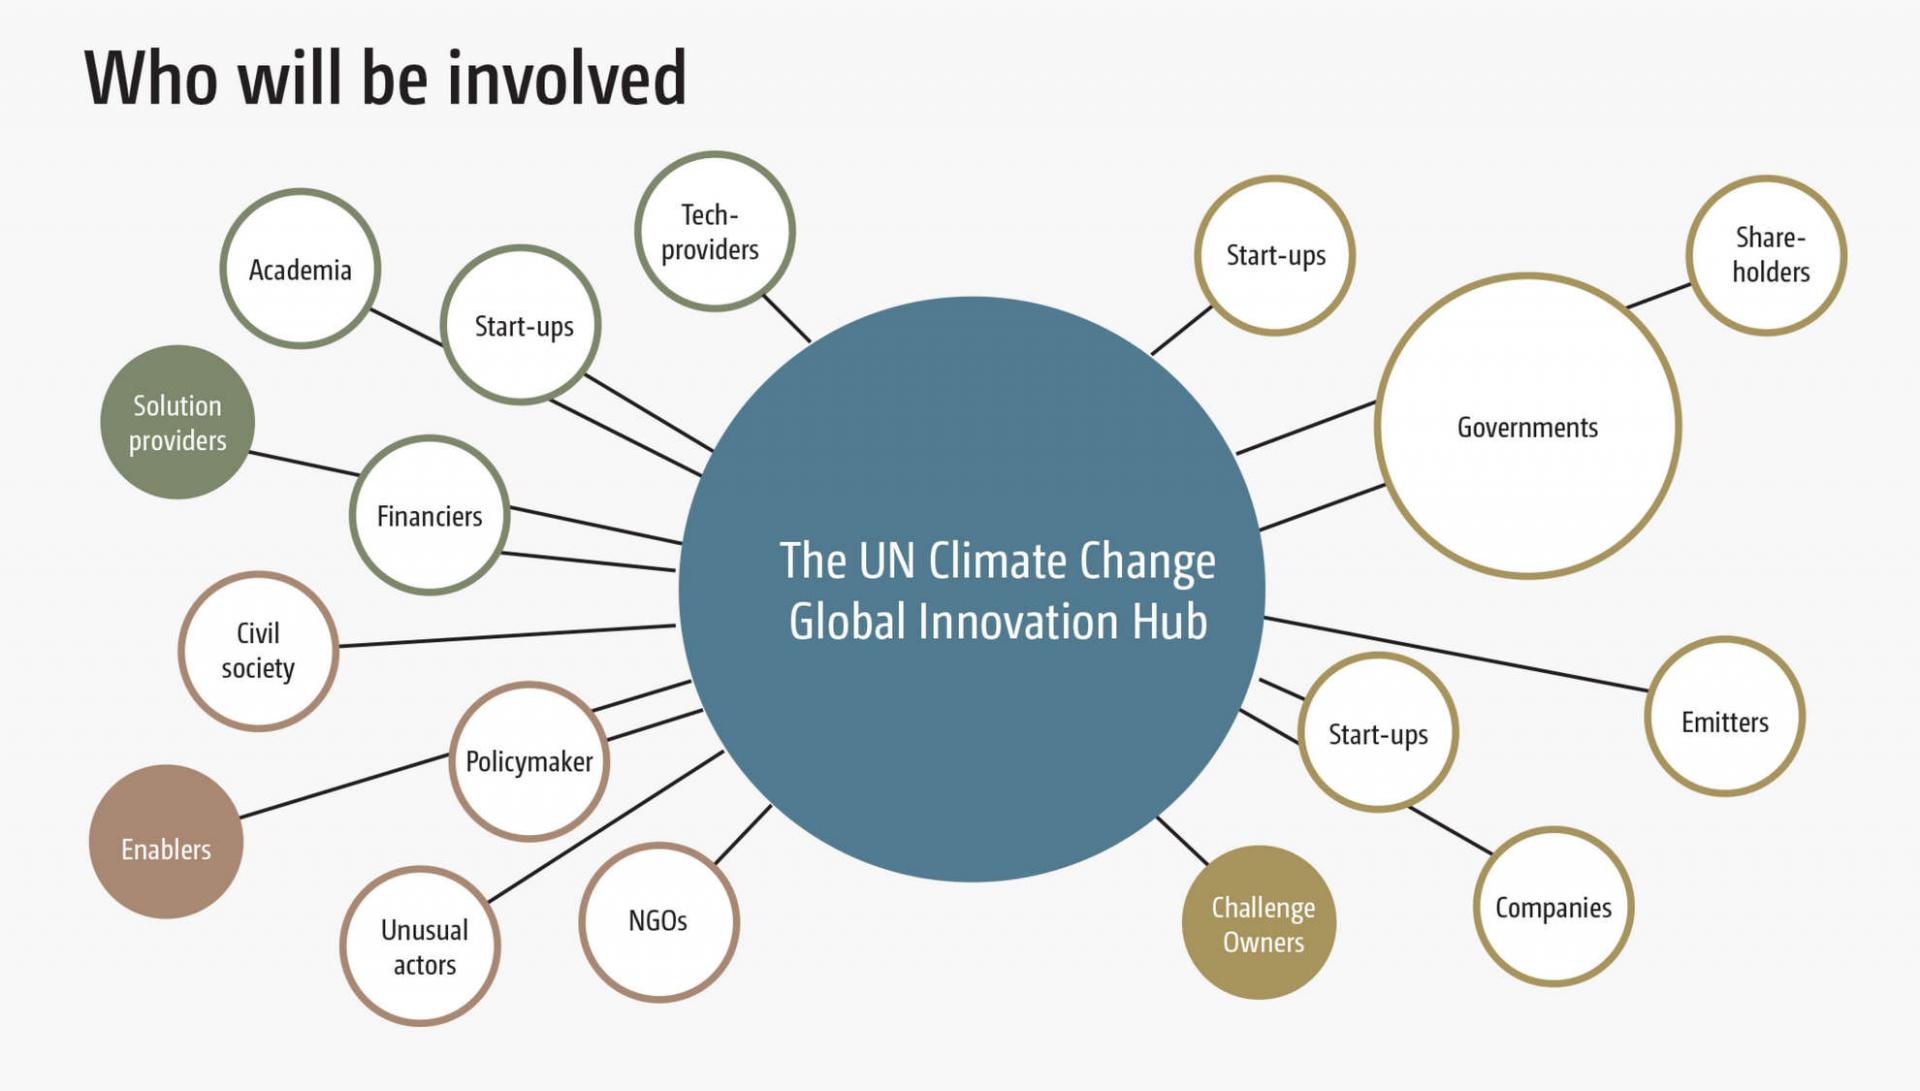 Diagram illustrating who will be involved in the global innovation hub initiative.